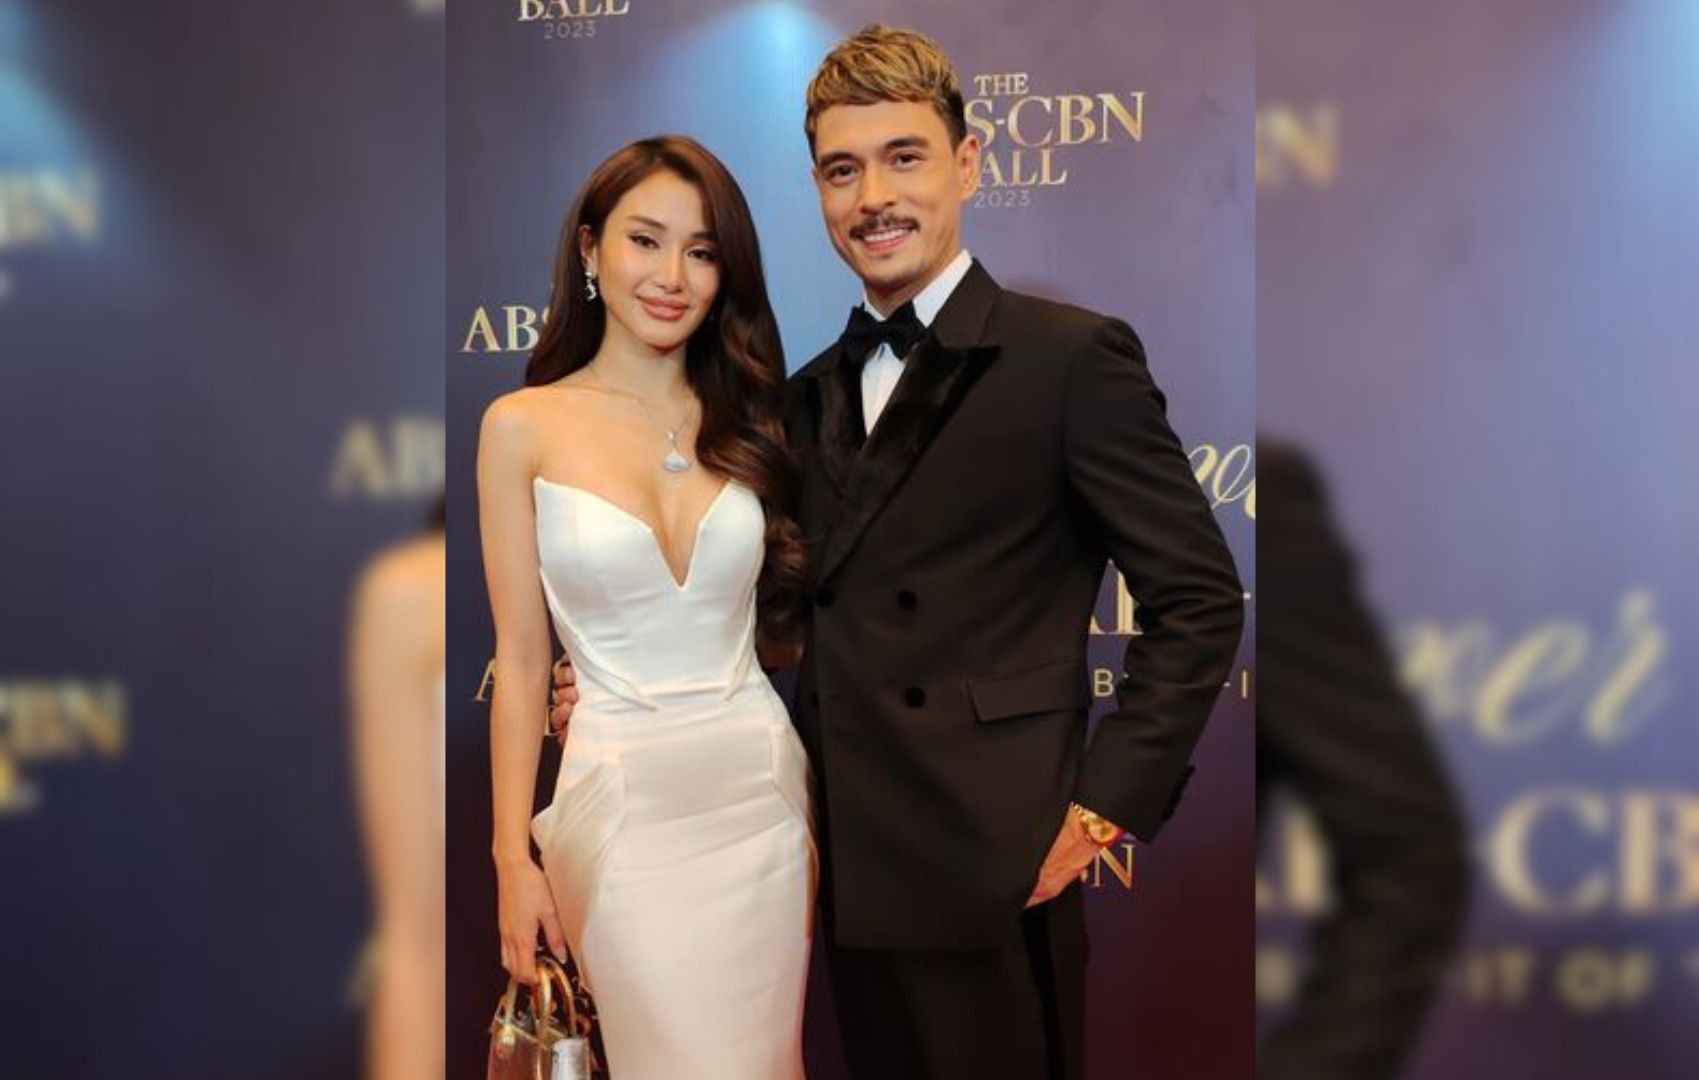 Chie Filomeno, Jake Cuenca attend ABS-CBN Ball 2023 after rekindled romance thumbnail